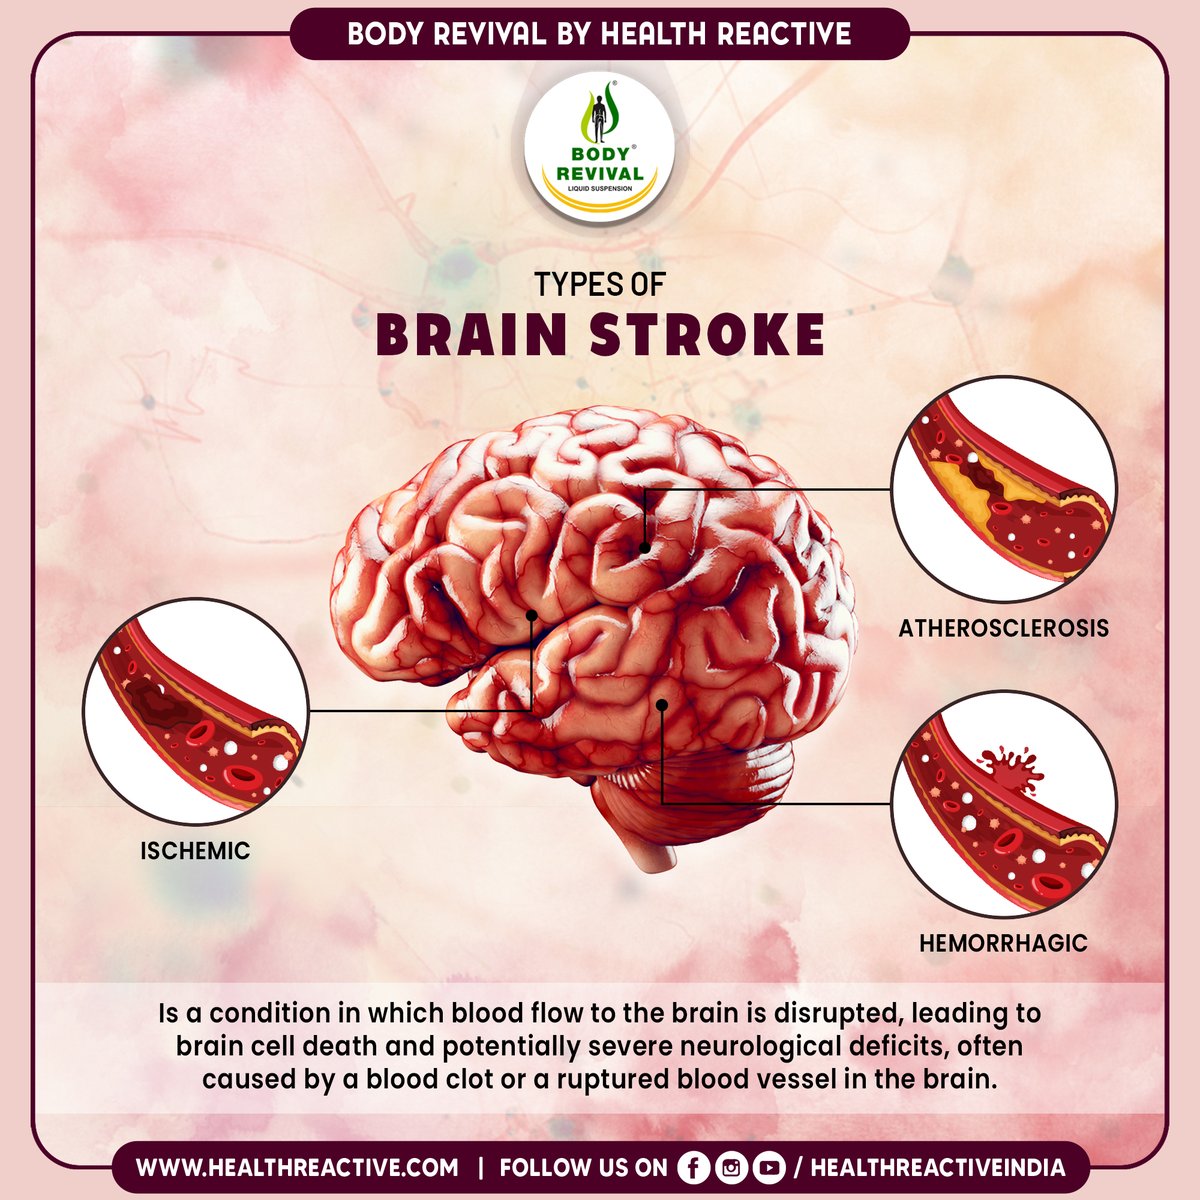 Explore various types of brain strokes: Ischemic, Hemorrhagic, and Transient Ischemic Attack (TIA). Recognizing symptoms and seeking prompt medical help is crucial for recovery.

For More Follow Us
healthreactive.com

#immunebooster #HealthReactive #bodyrevival #DrMunirKhan…